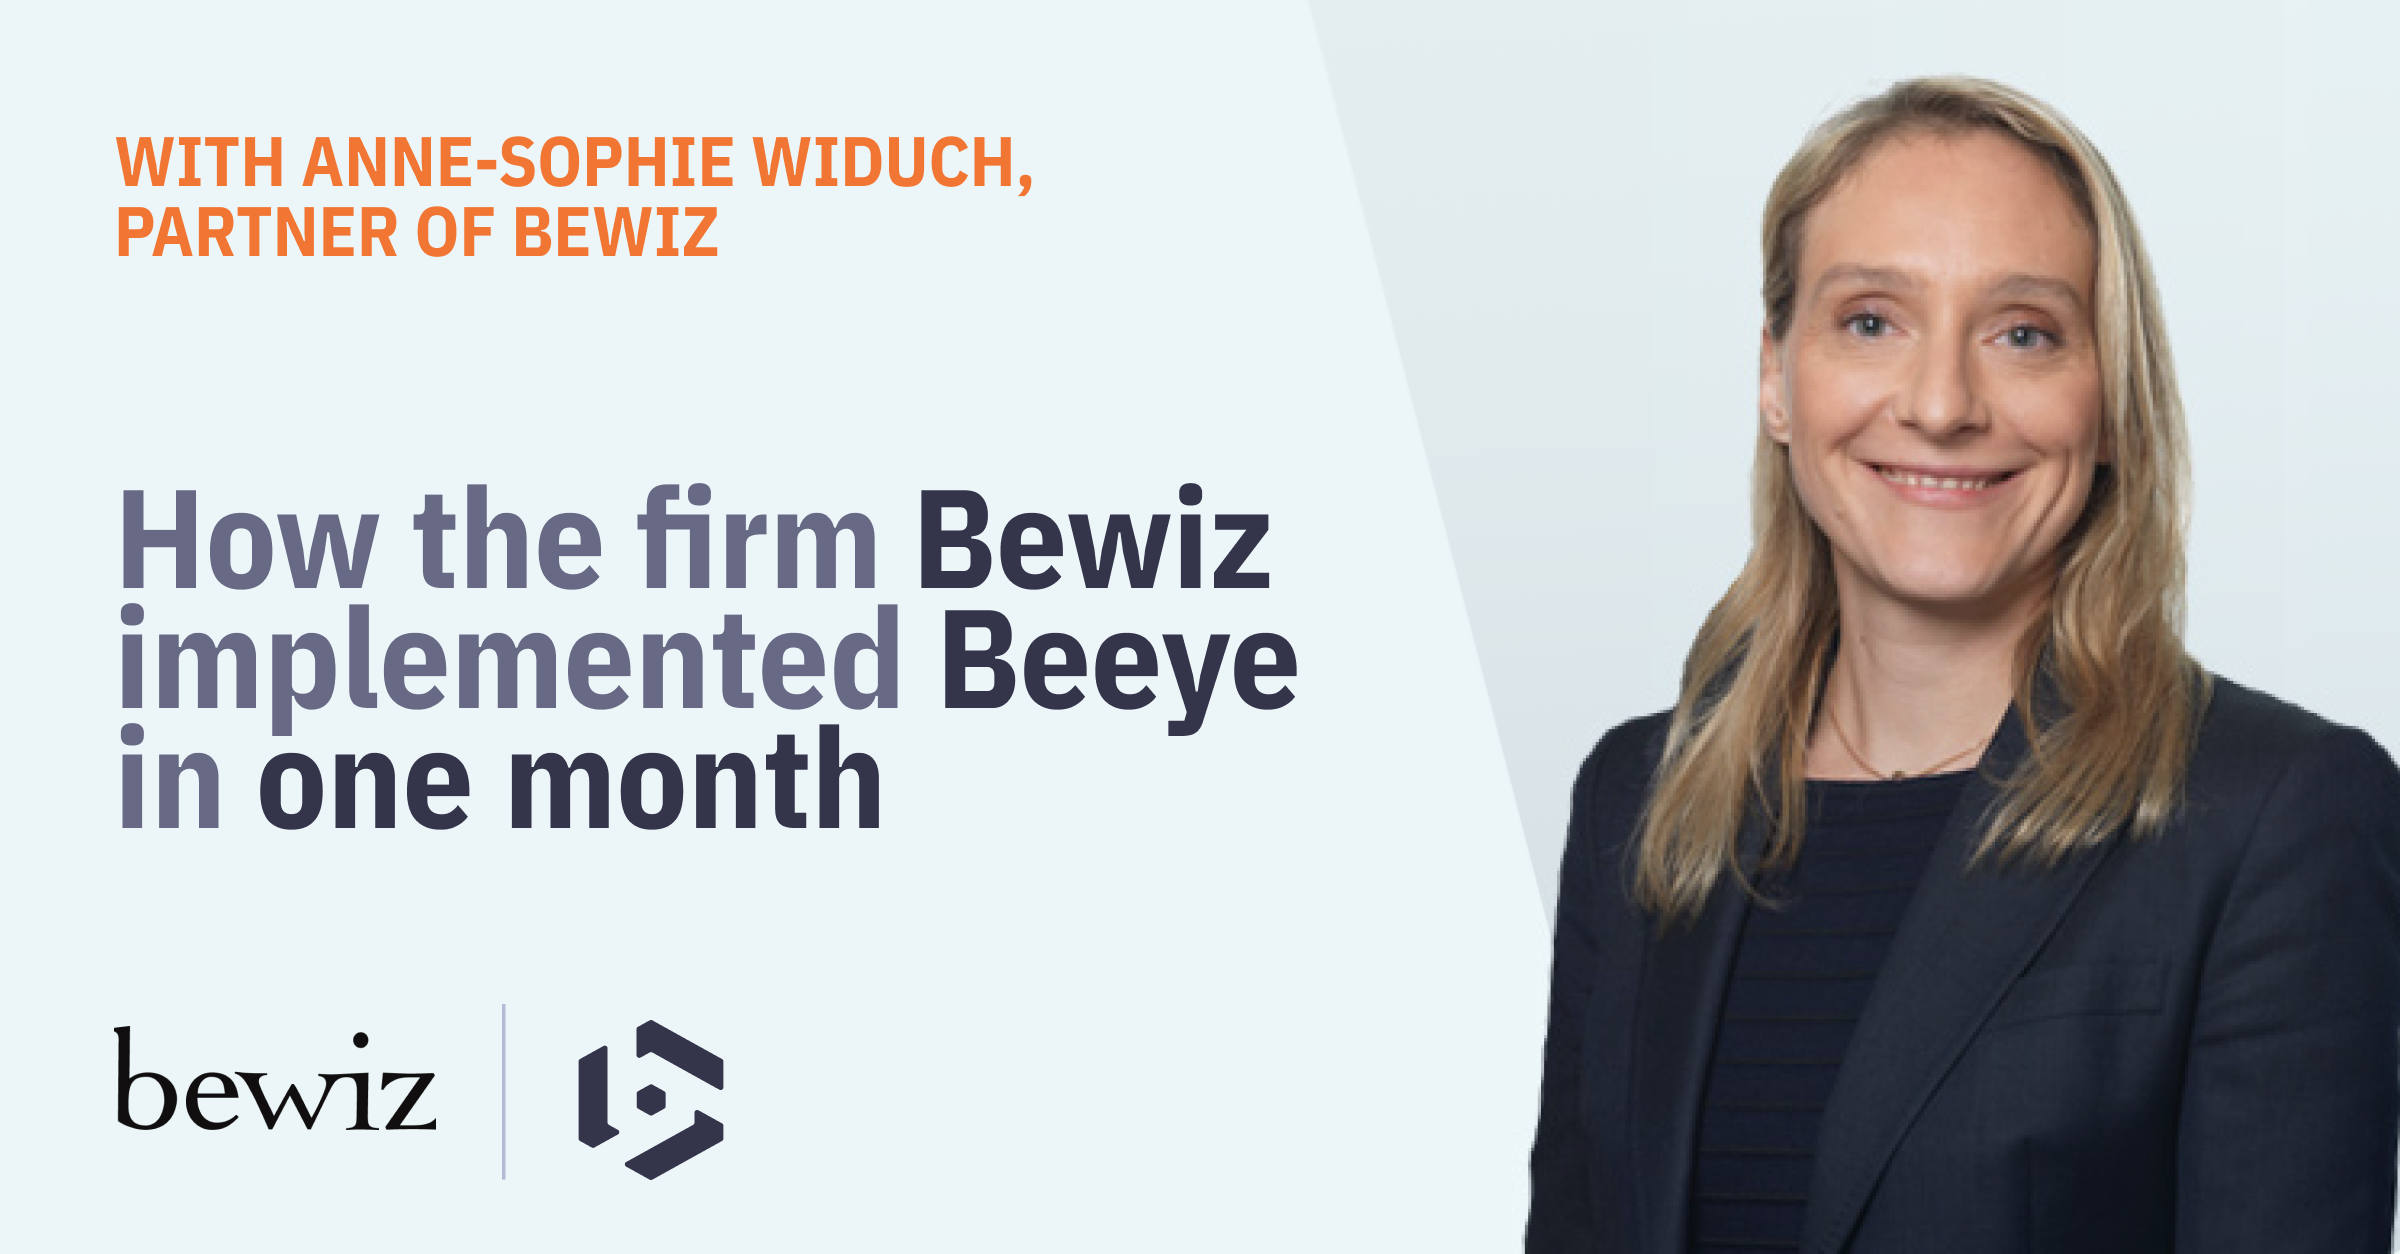 How the firm Bewiz implemented Beeye in one month